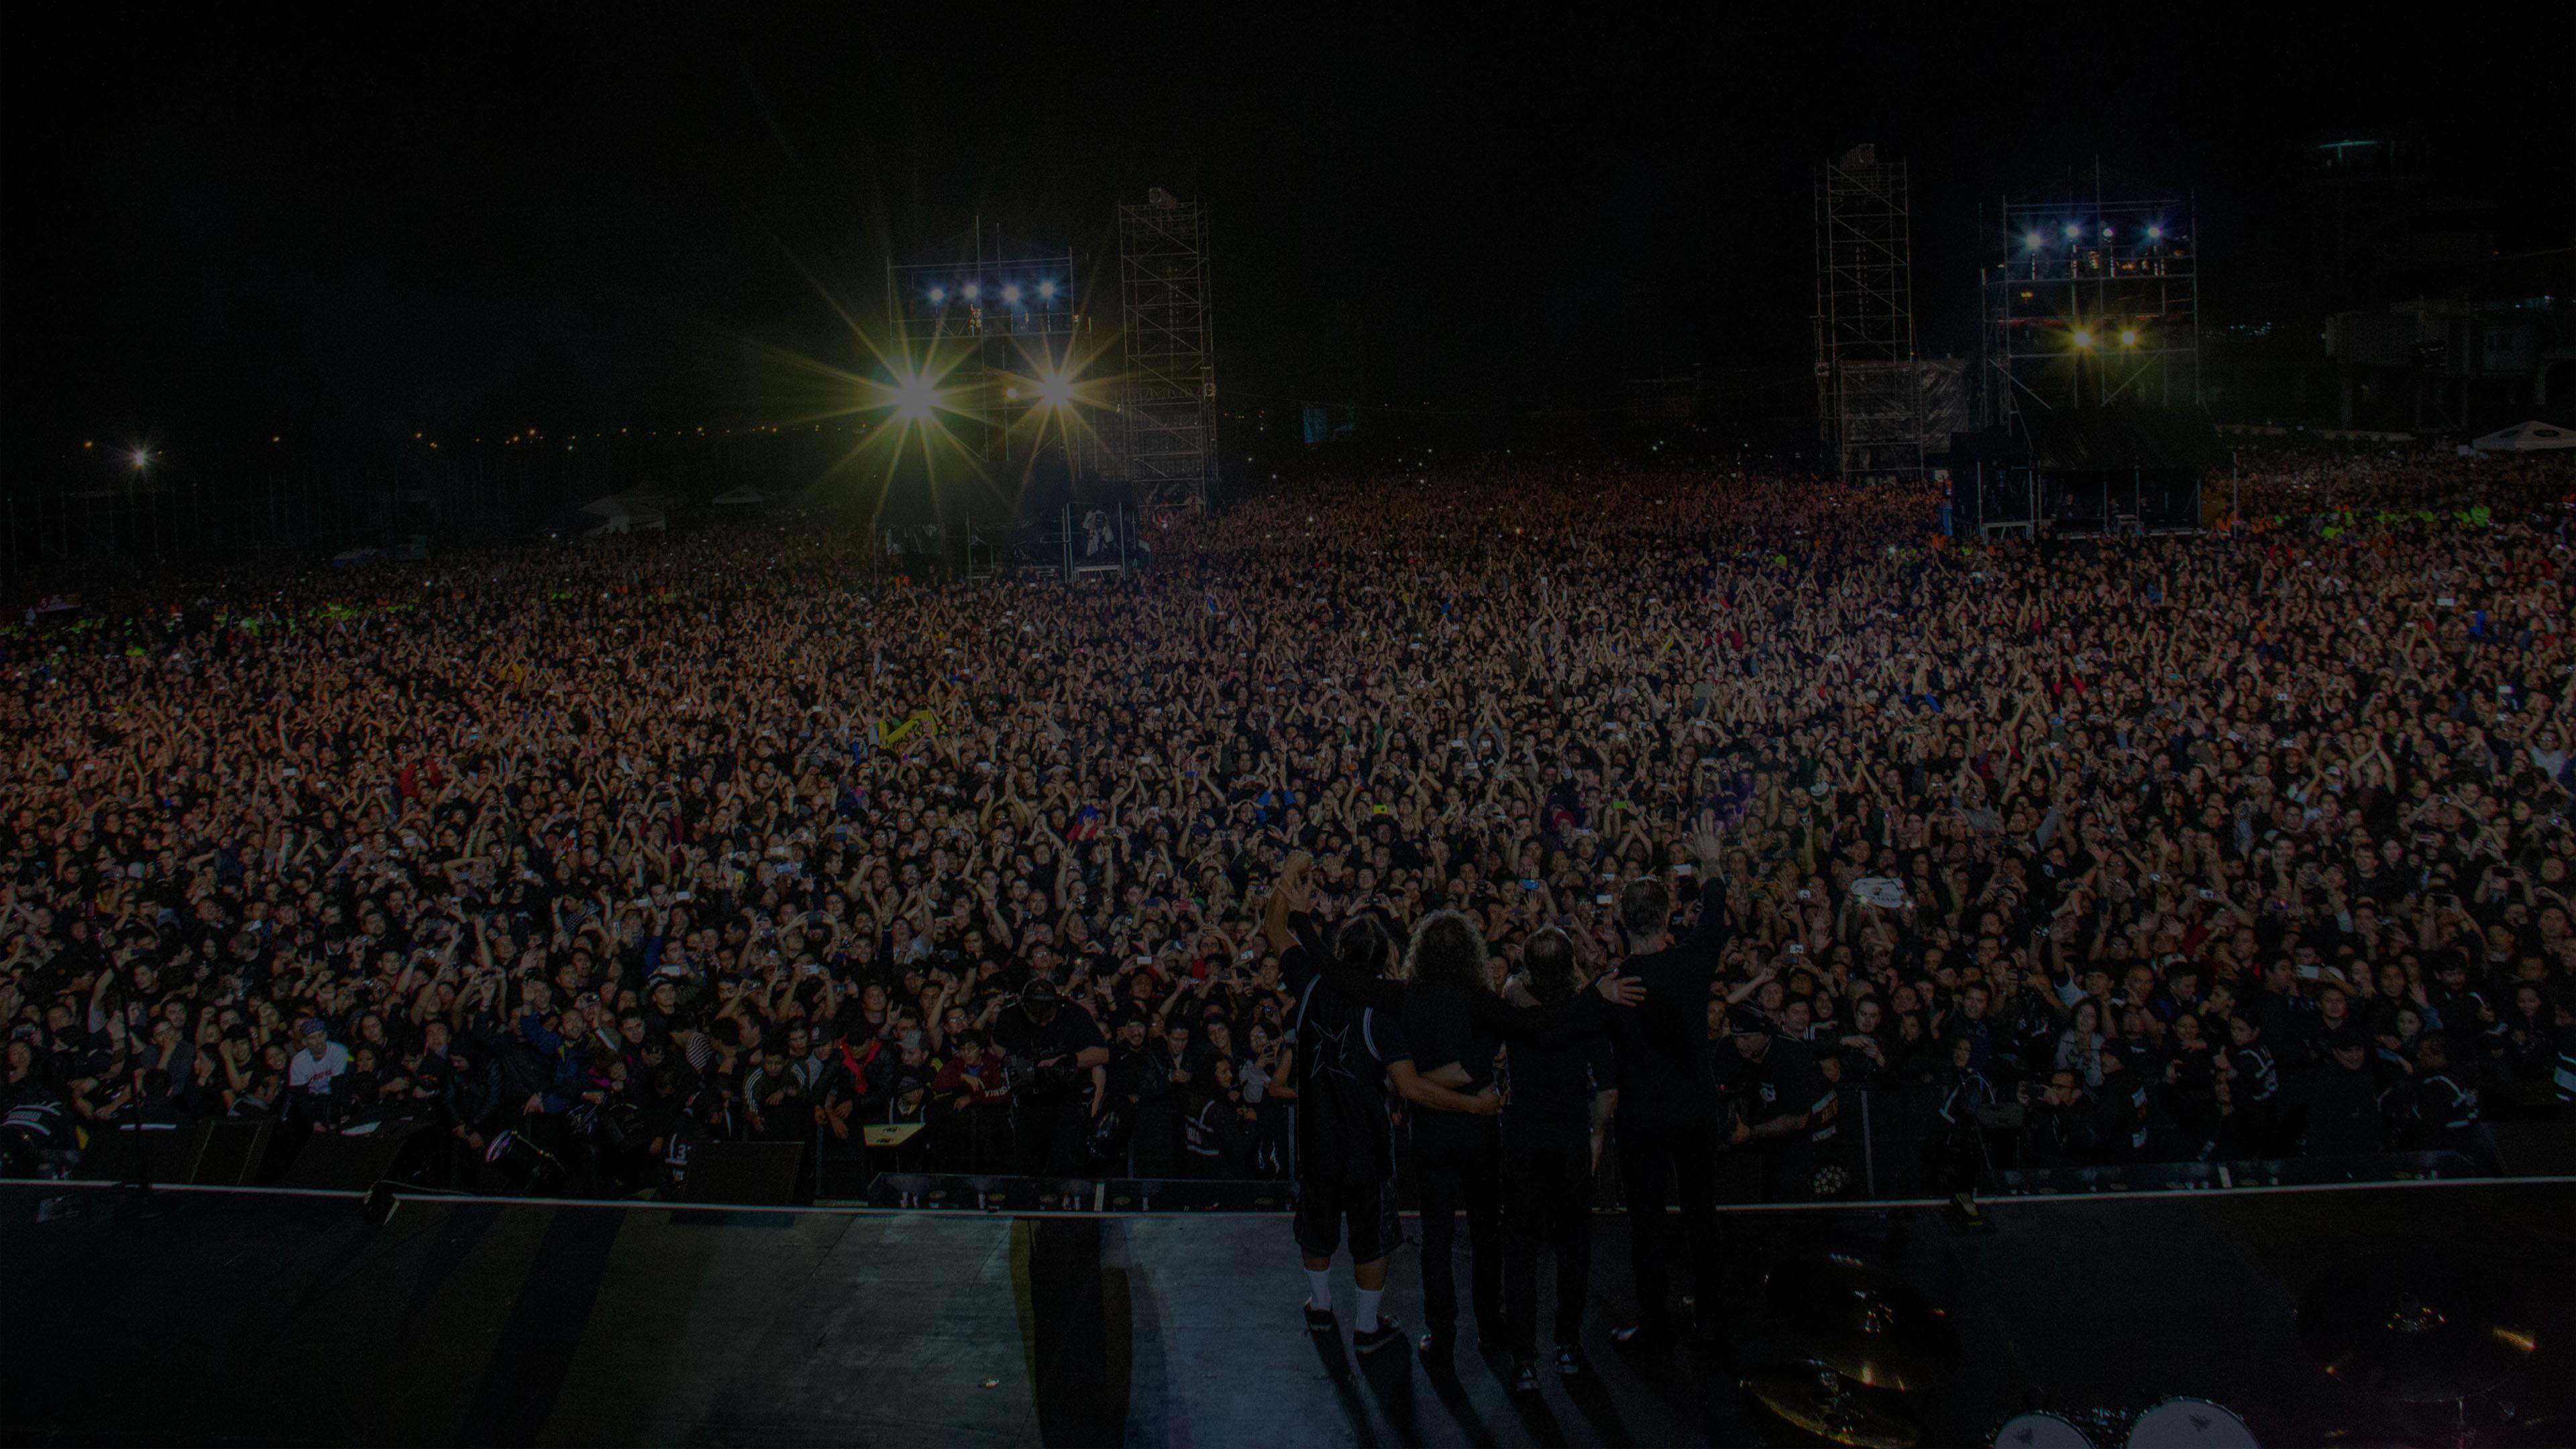 Banner Image for the photo gallery from the gig in Quito, Ecuador shot on March 18, 2014